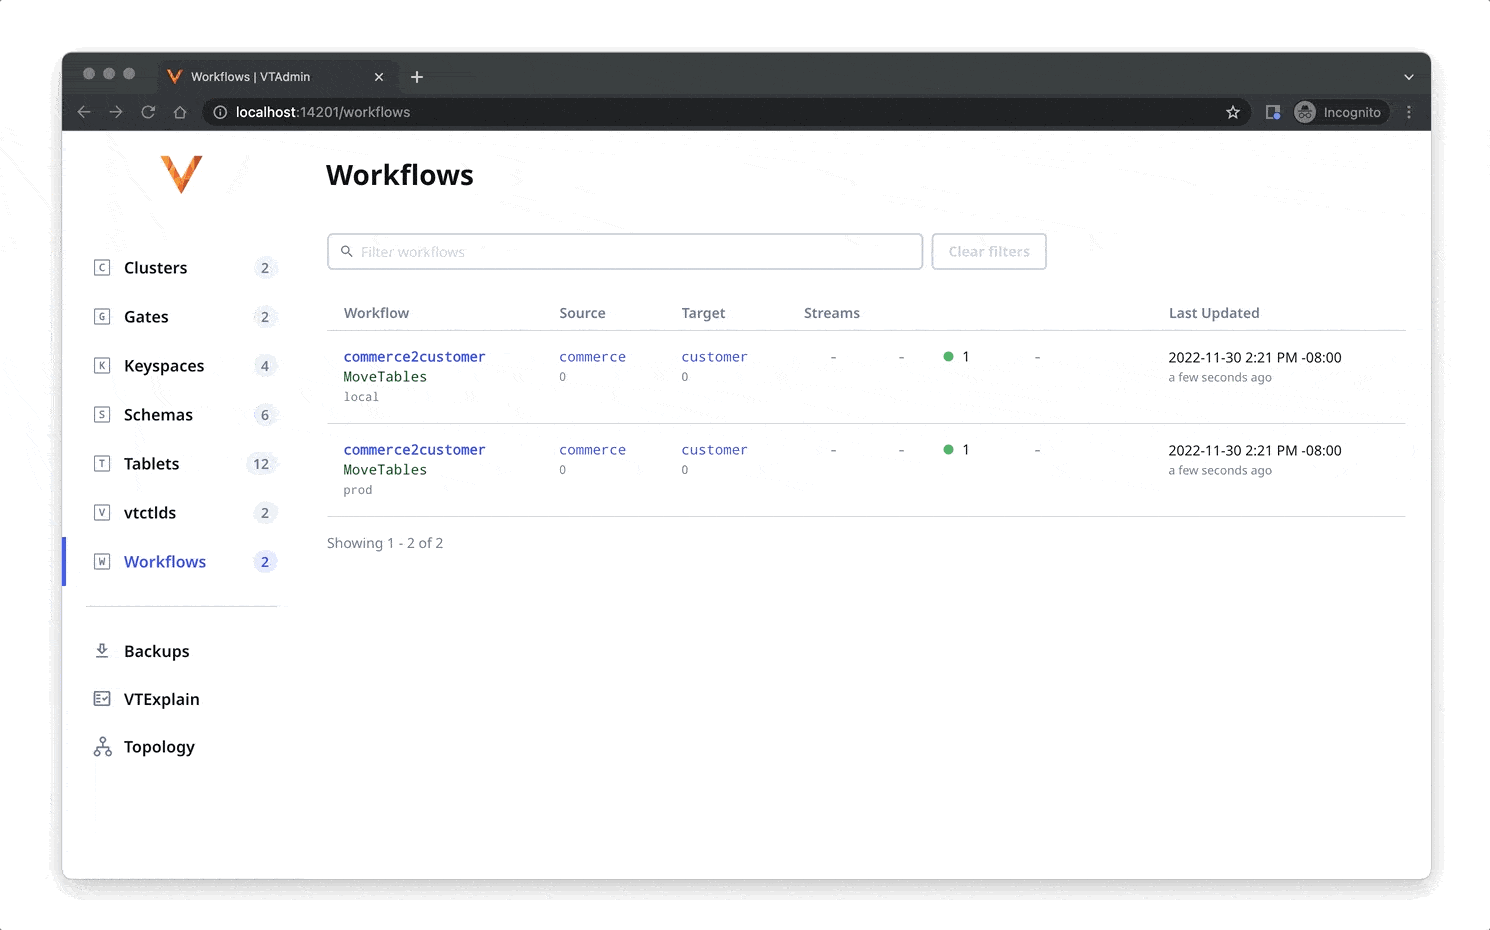 GIF of workflow features in VTAdmin Web